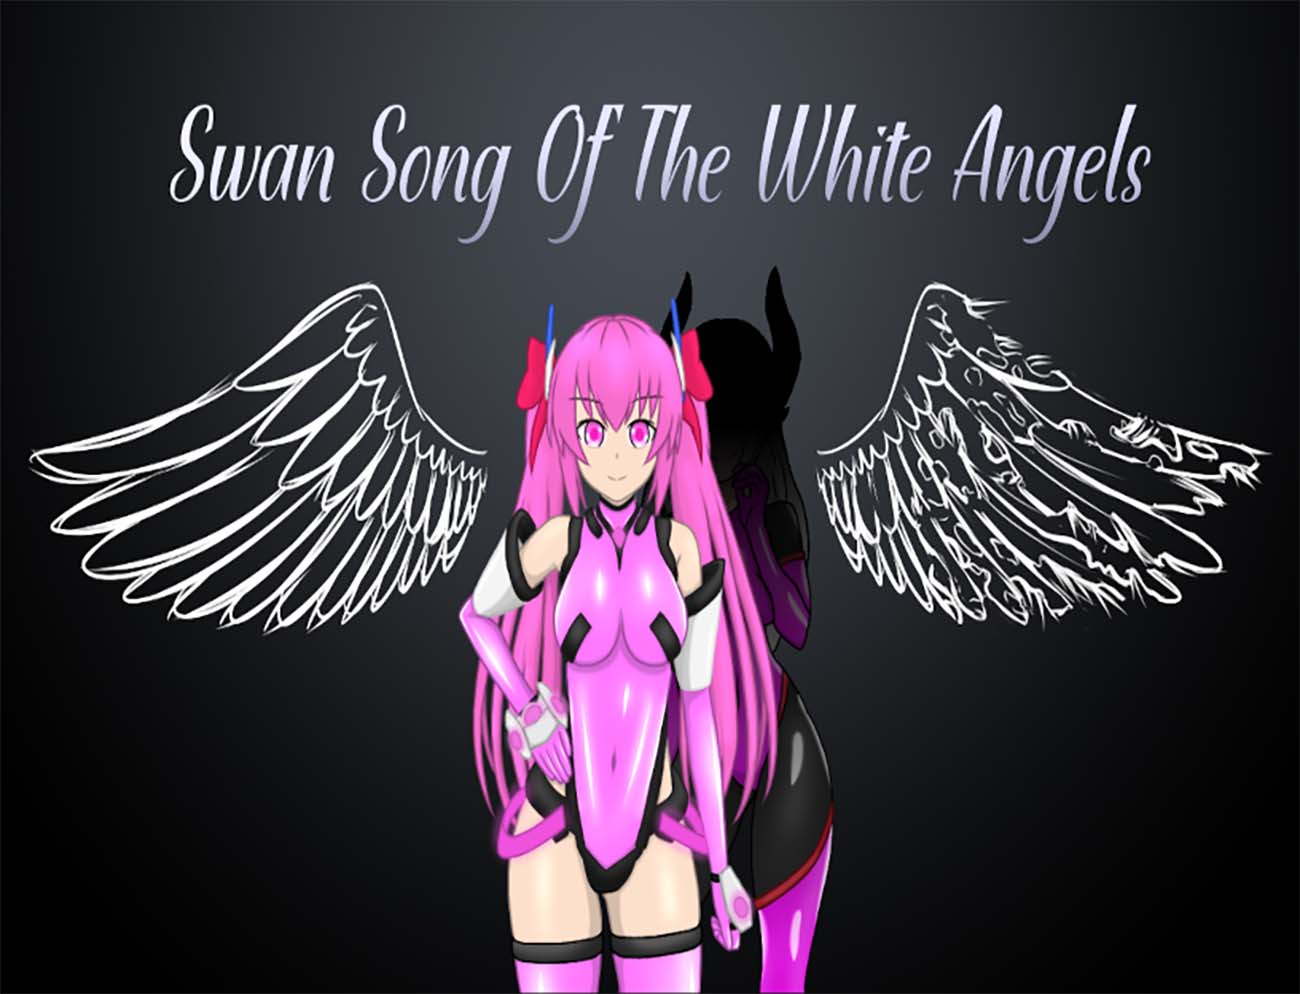 Swan Song of the White Angels